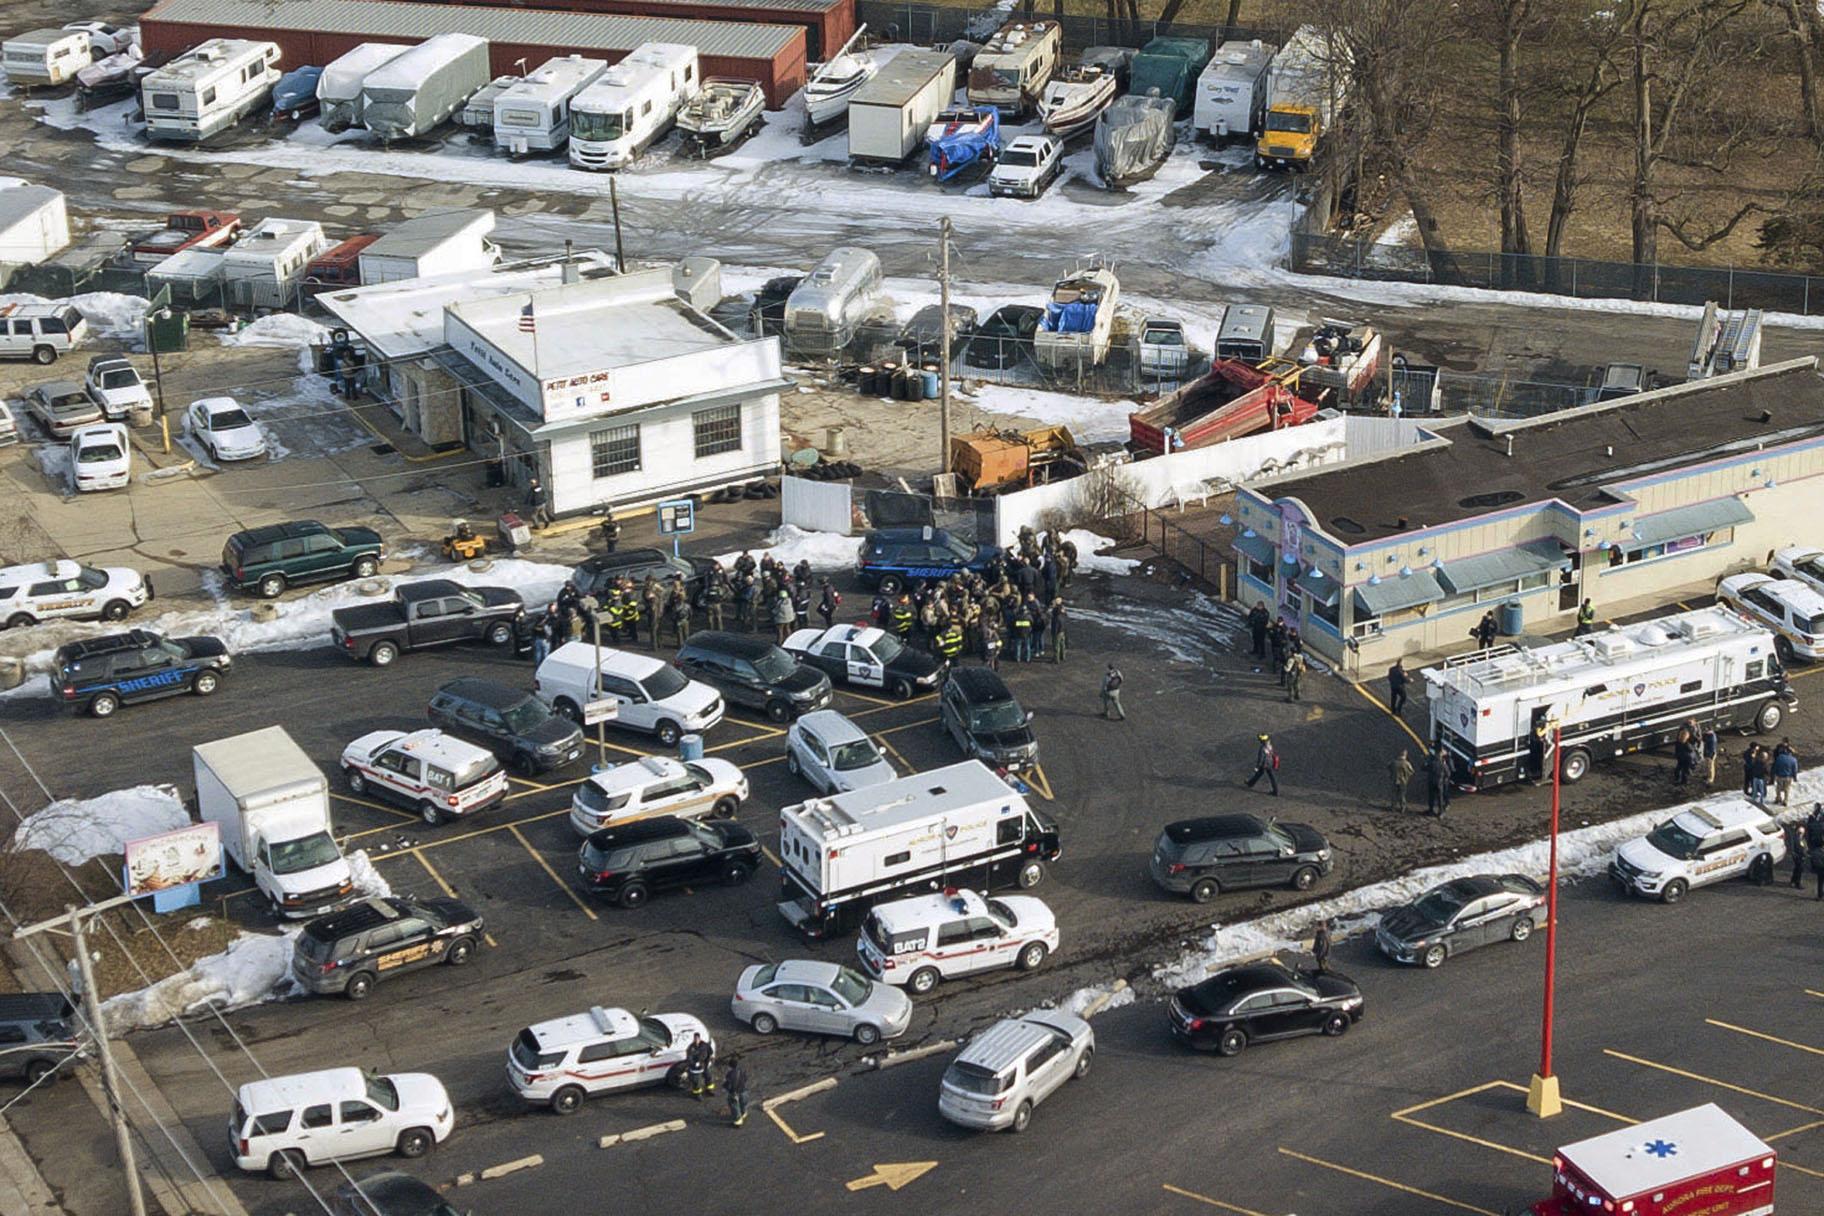 Law enforcement personnel gather near the scene of a shooting at an industrial park in Aurora, Illinois, on Friday, Feb. 15, 2019. (Bev Horne / Daily Herald via AP)